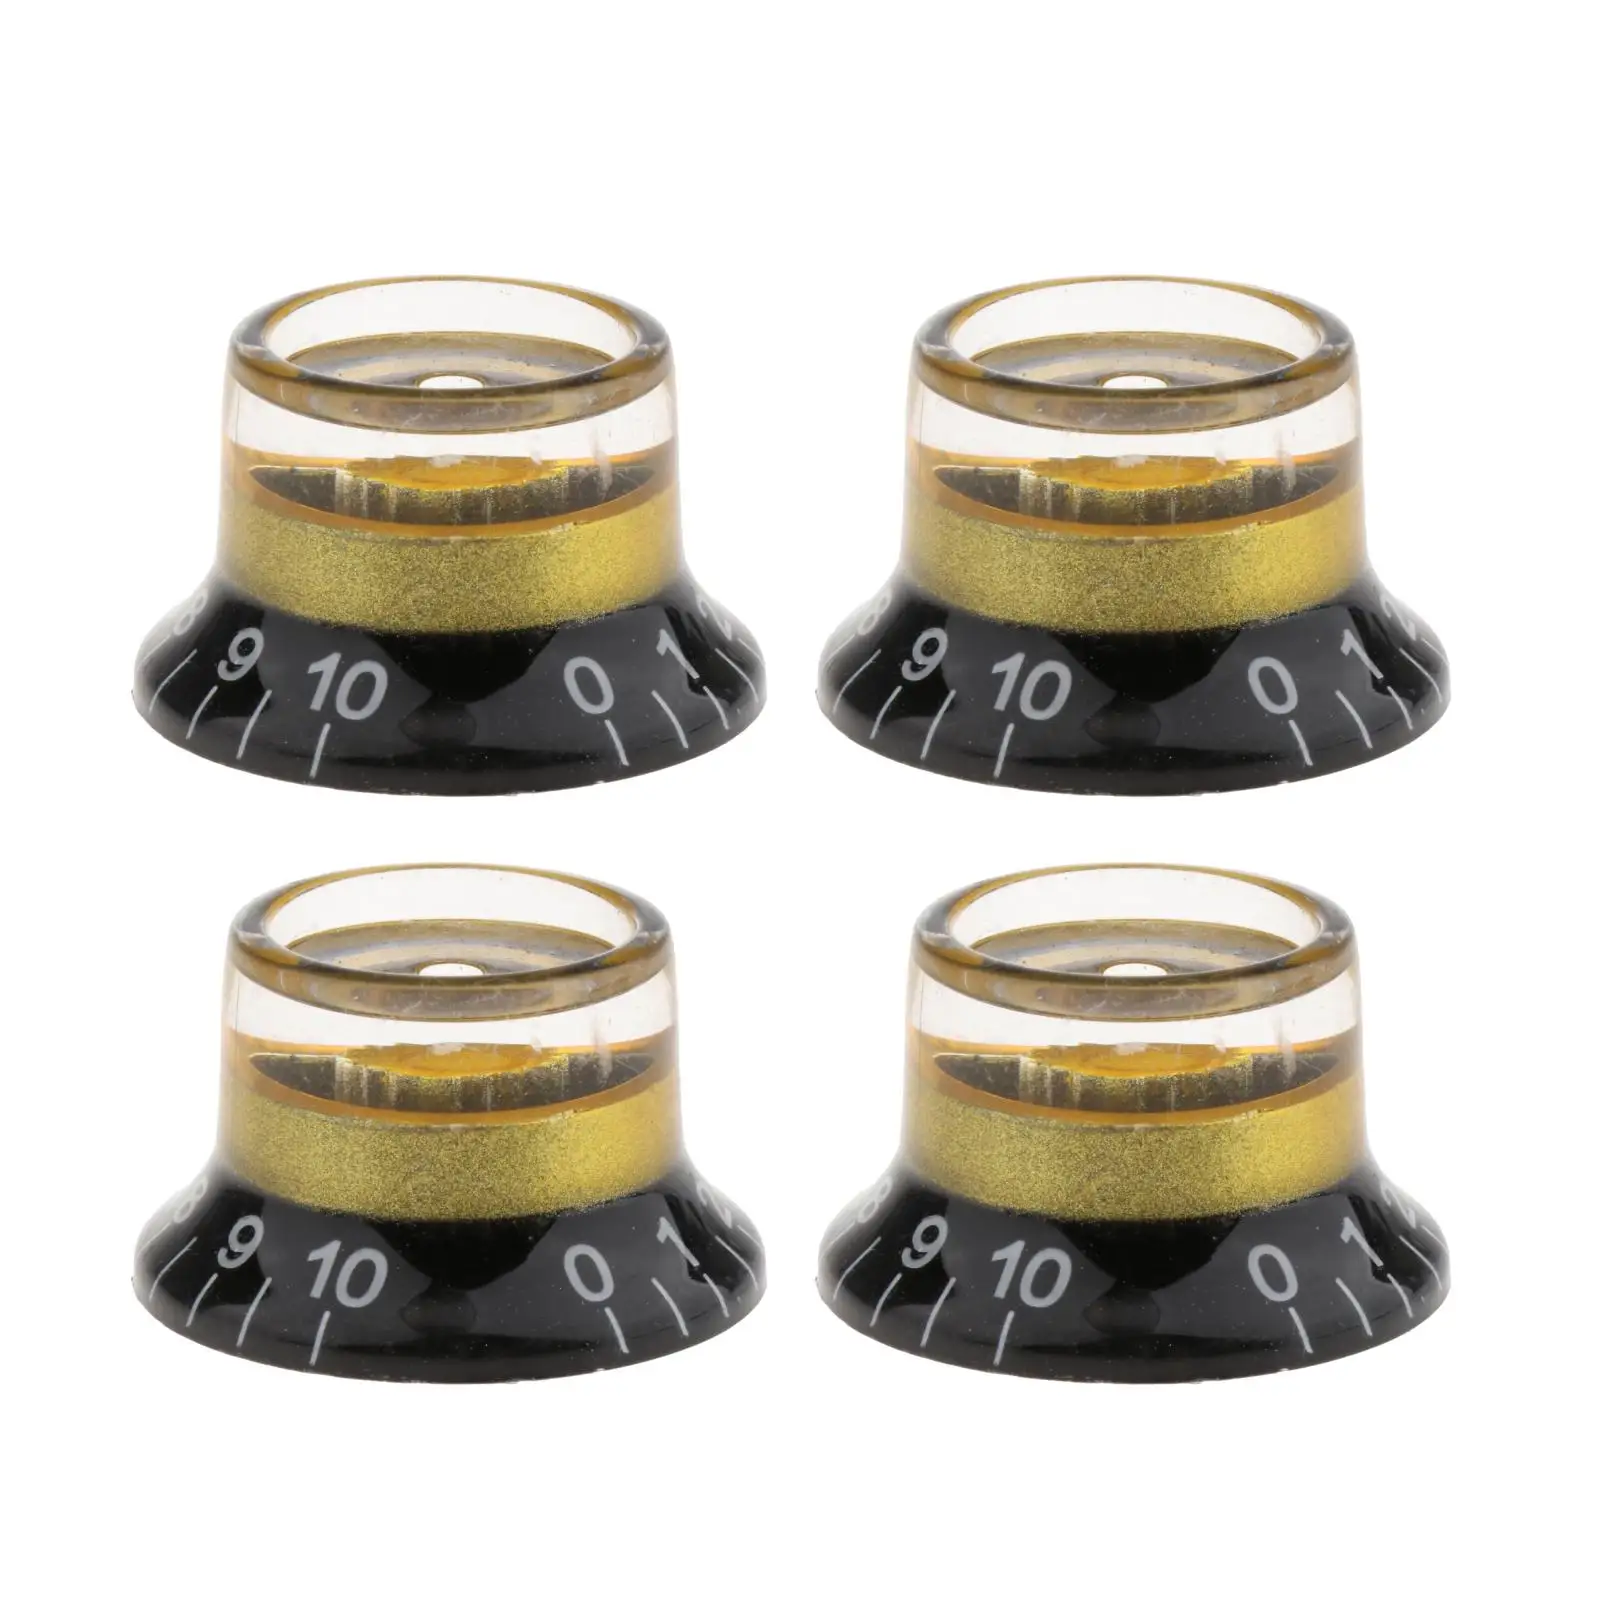 4PCS Electric Guitar Tone and Volume Control Knobs Guitars Replacement Numbers Potentiometer Knobs